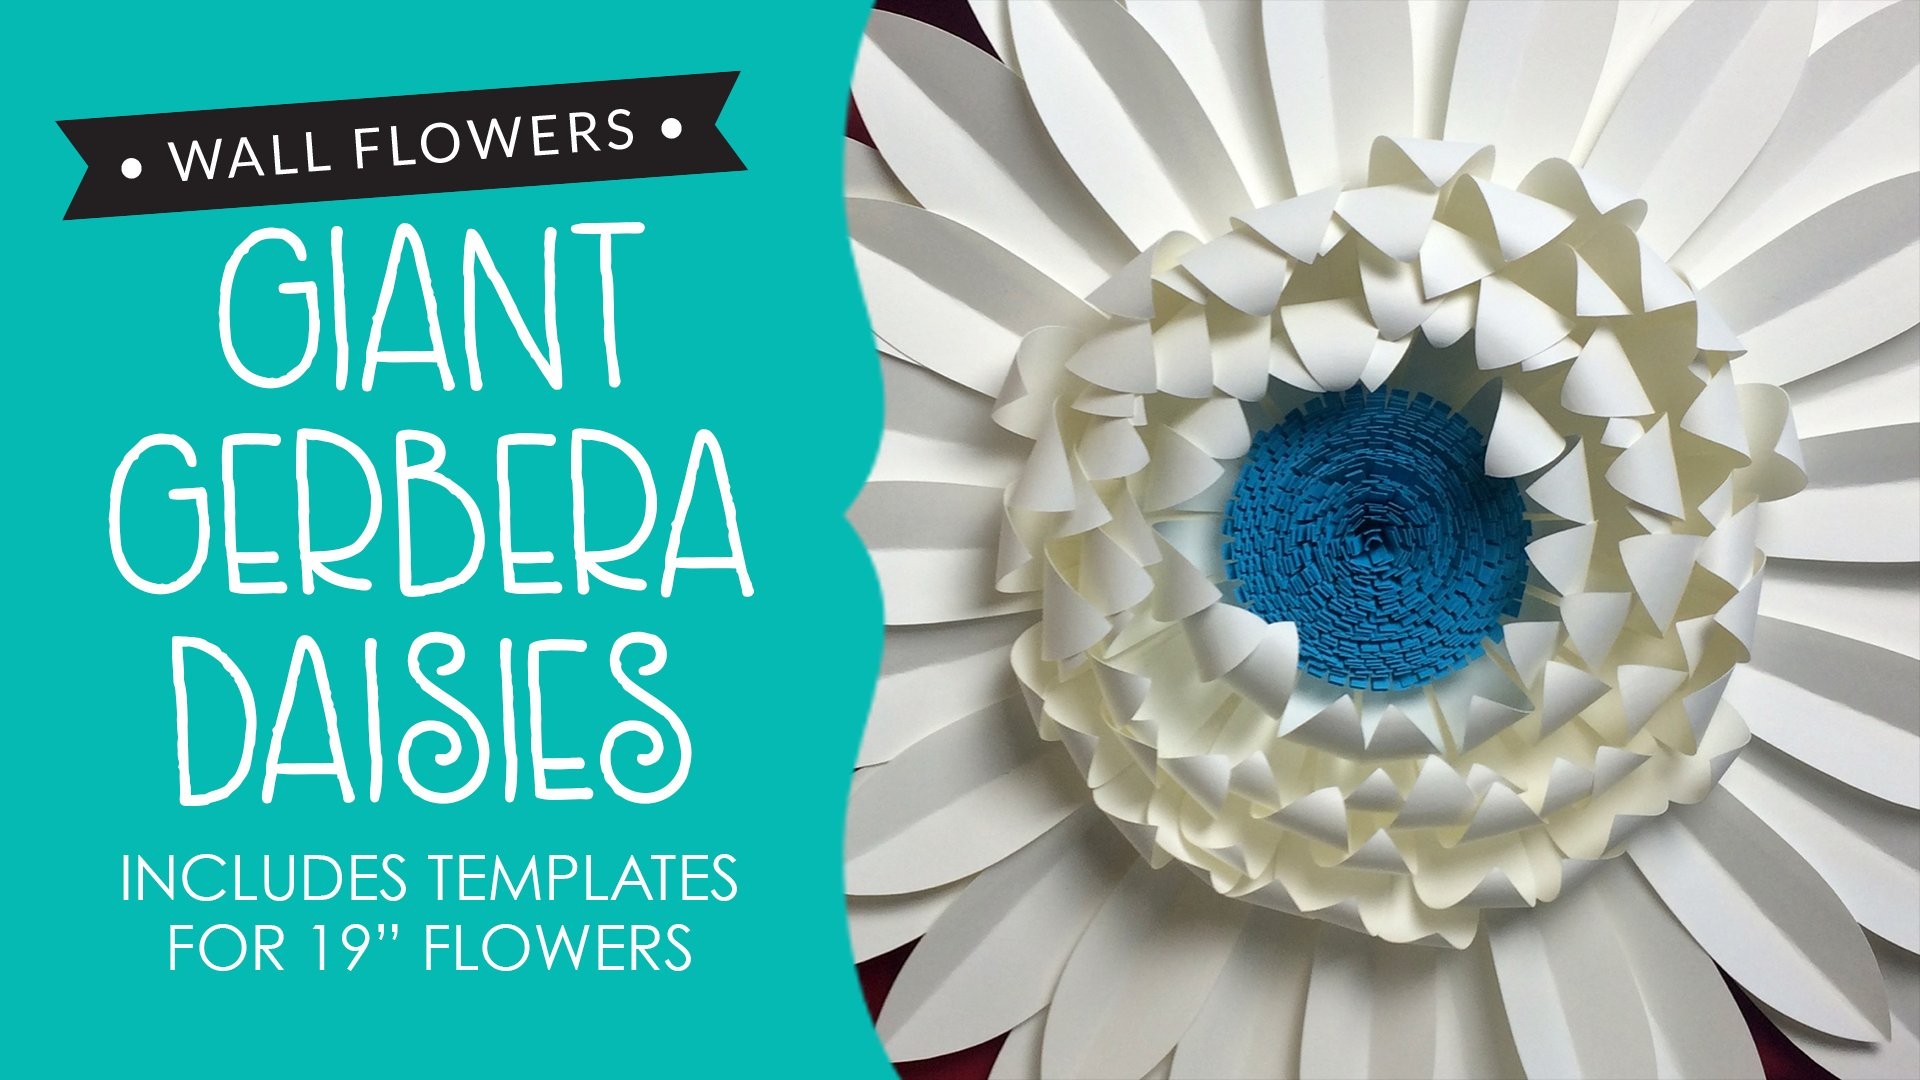 Wall Flowers Giant Gerbera Daisies Includes S Heather Daisy